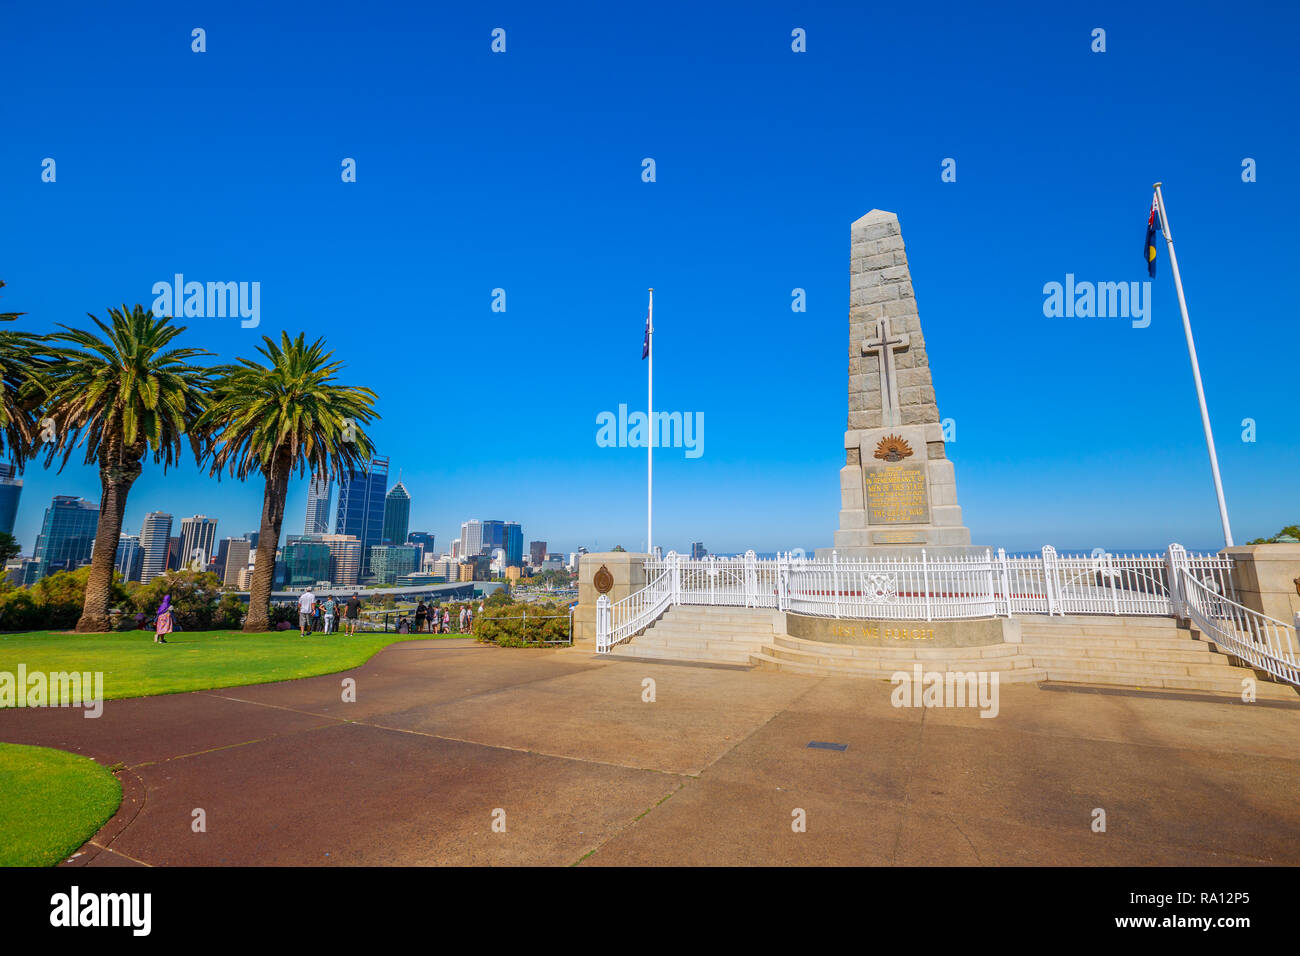 Perth, Australia - Jan 3, 2018: State War Memorial on Mount Eliza in Kings Park. Perth cityscape on background. Kings Park is a large park in Perth by Western Australian Botanic Garden. Blue sky. Stock Photo